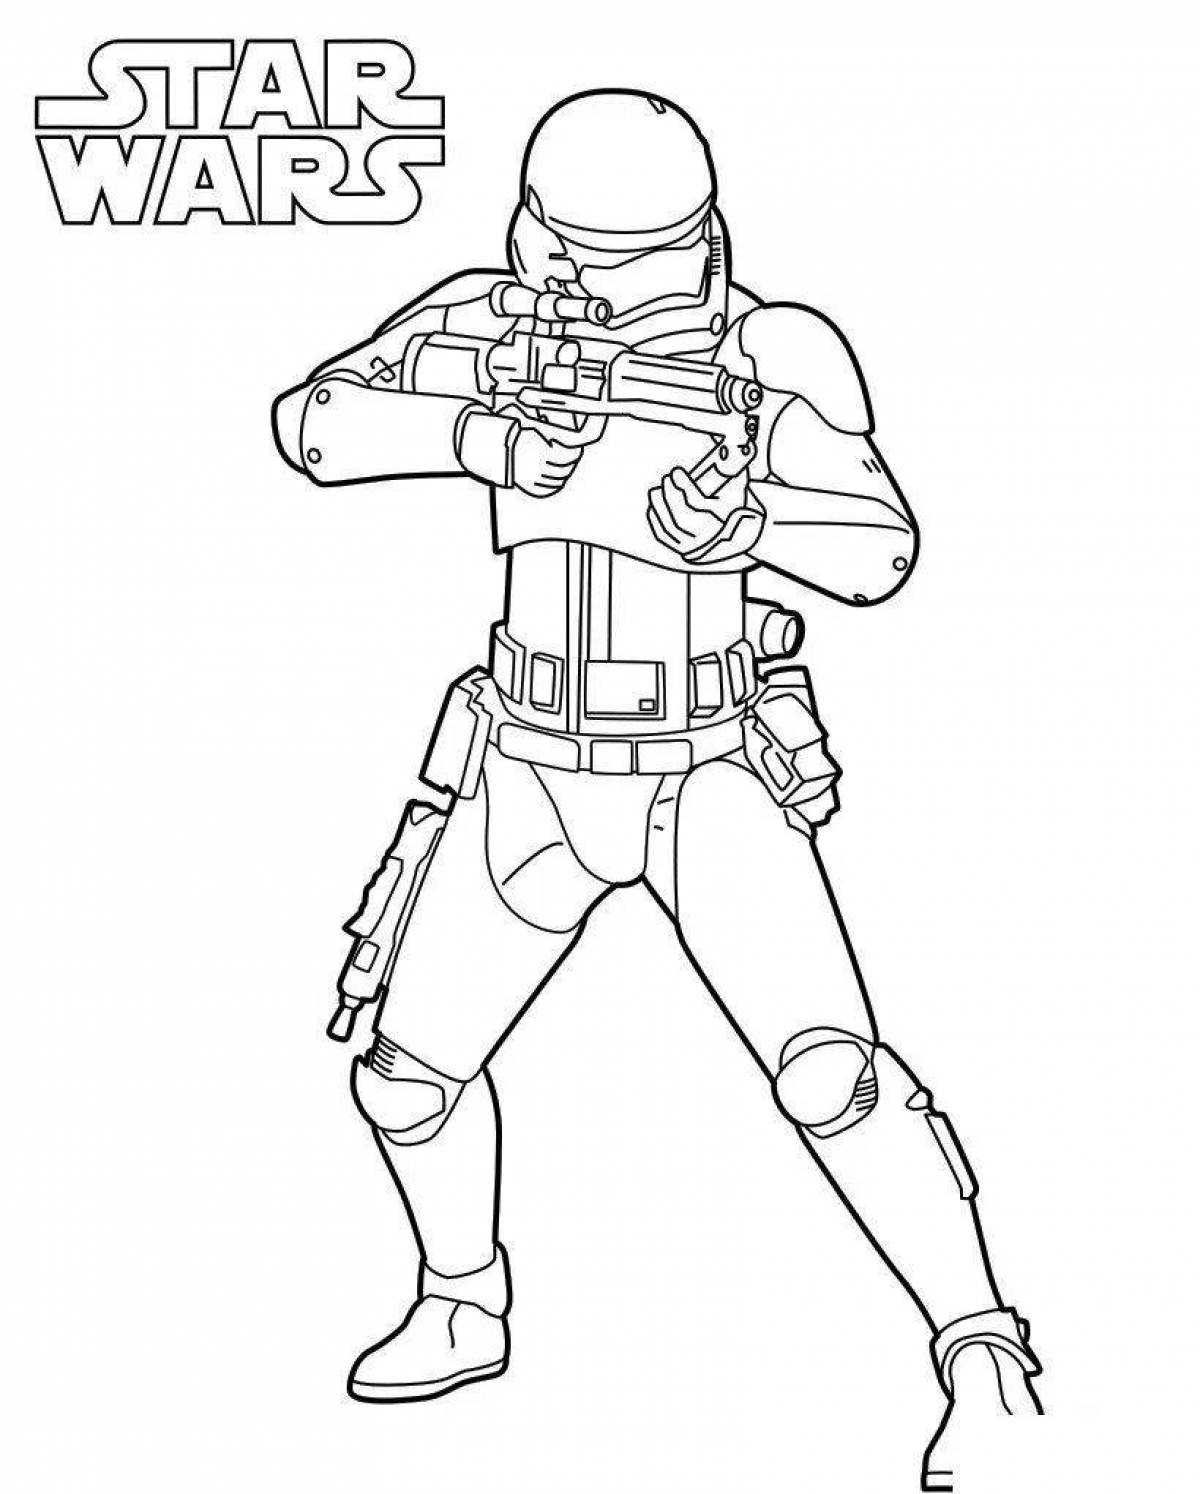 Shiny stormtrooper coloring page